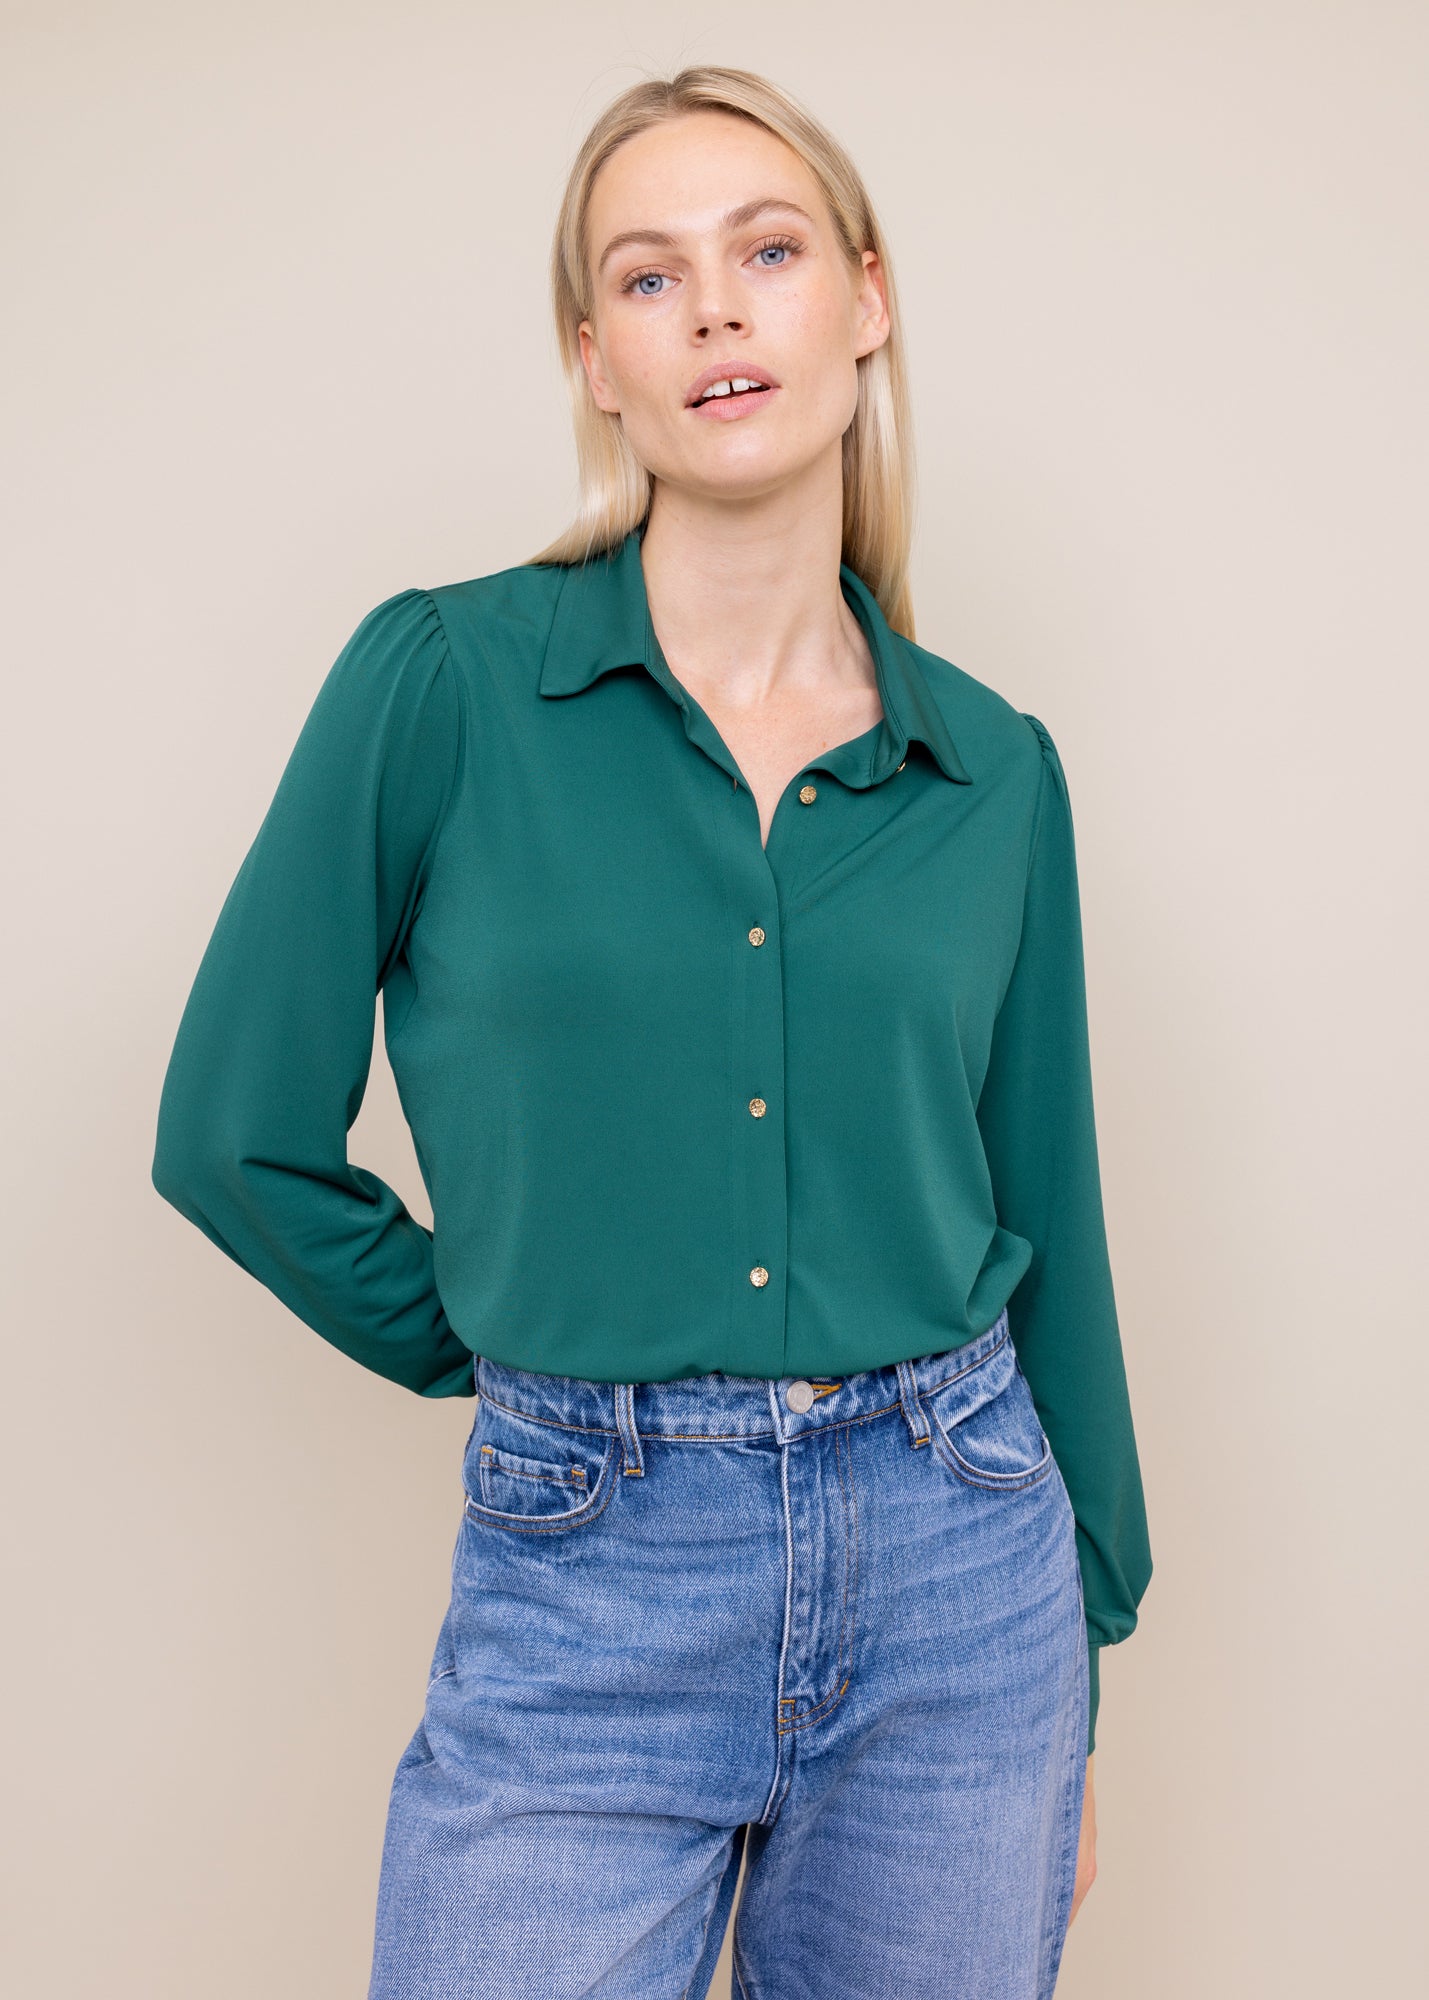 Tricot blouse with opulent buttons